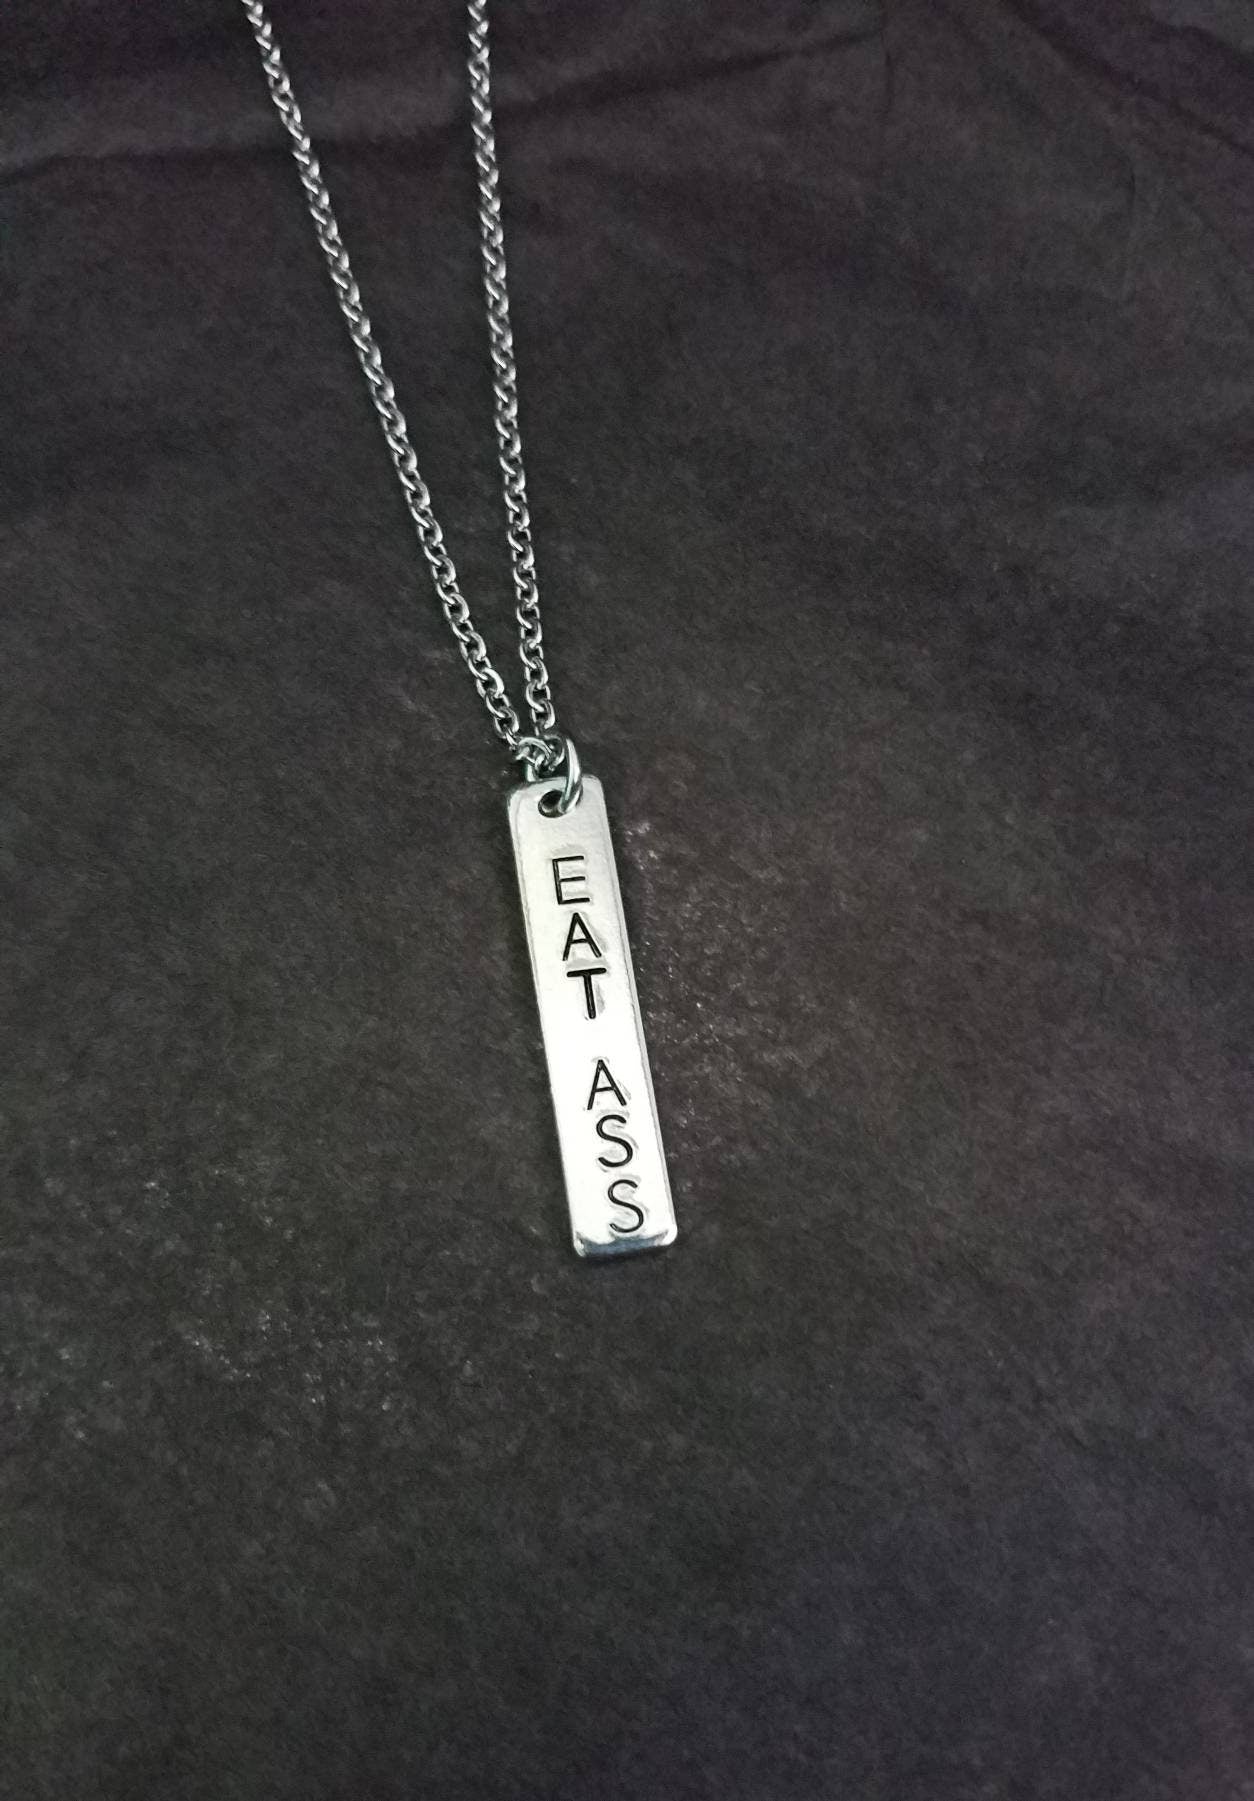 Eat Ass Hand stamped Pendant Necklace